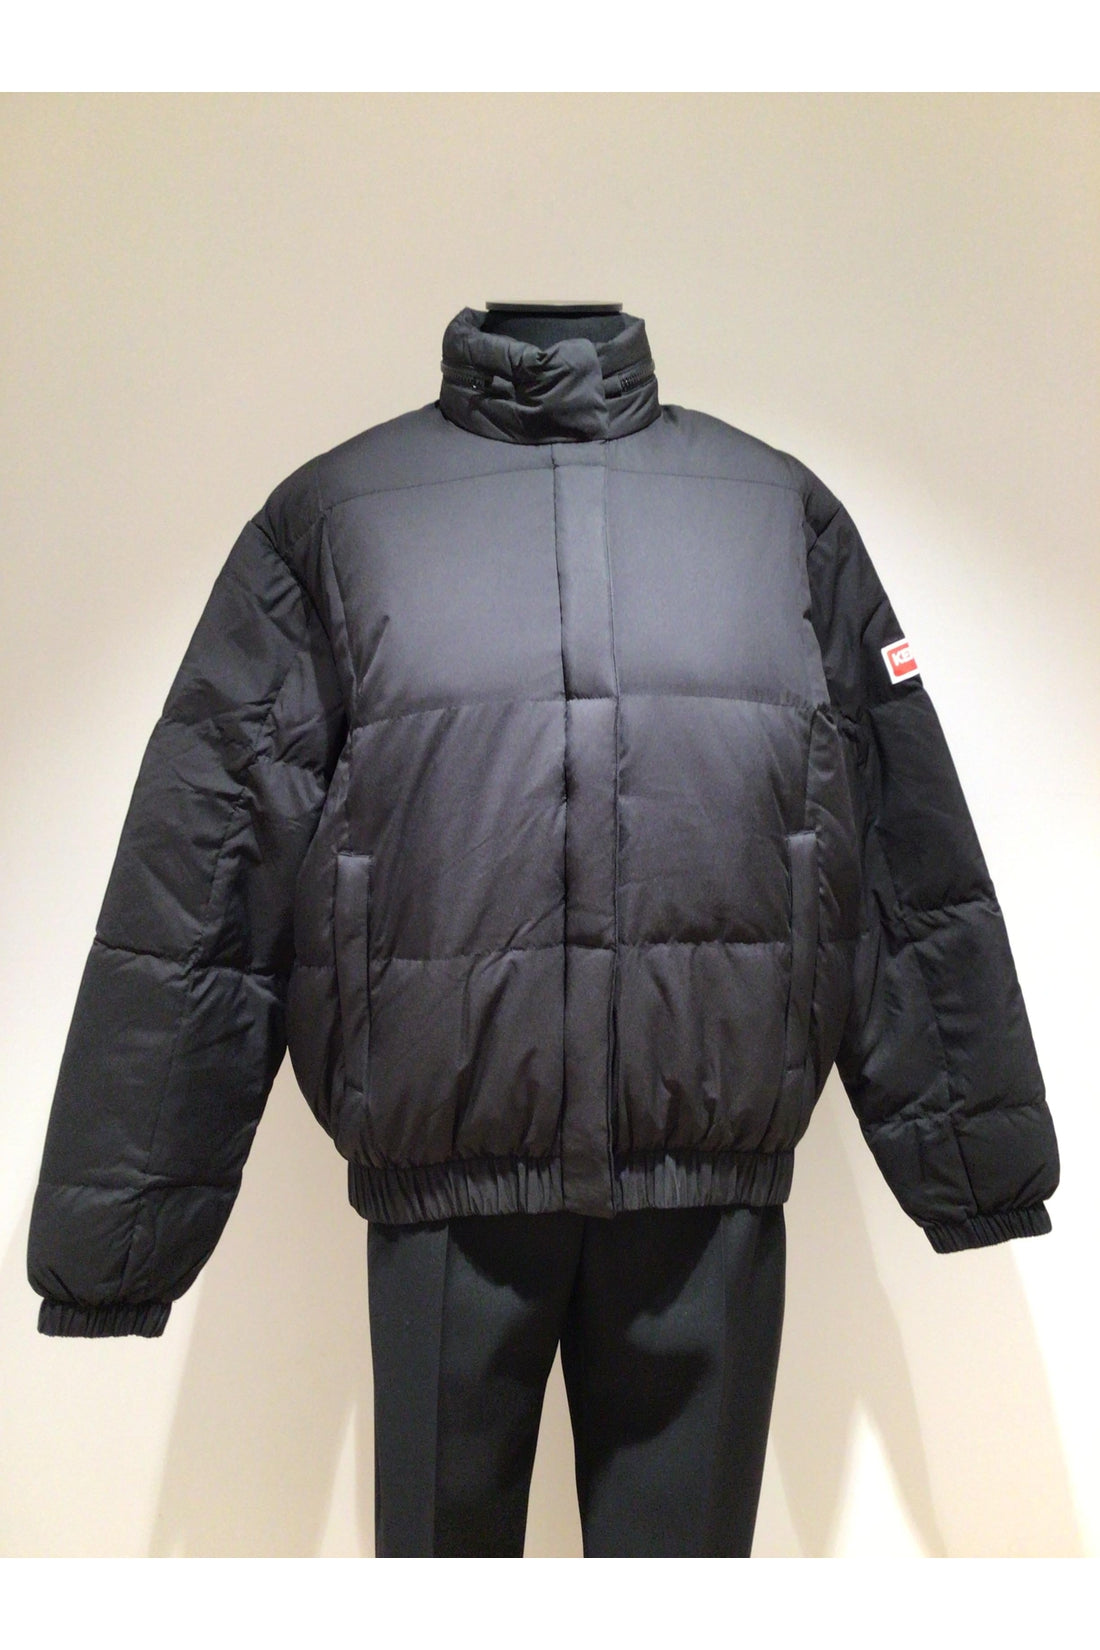 Kenzo-OUTLET-SALE-Boxy full zip down jacket-ARCHIVIST